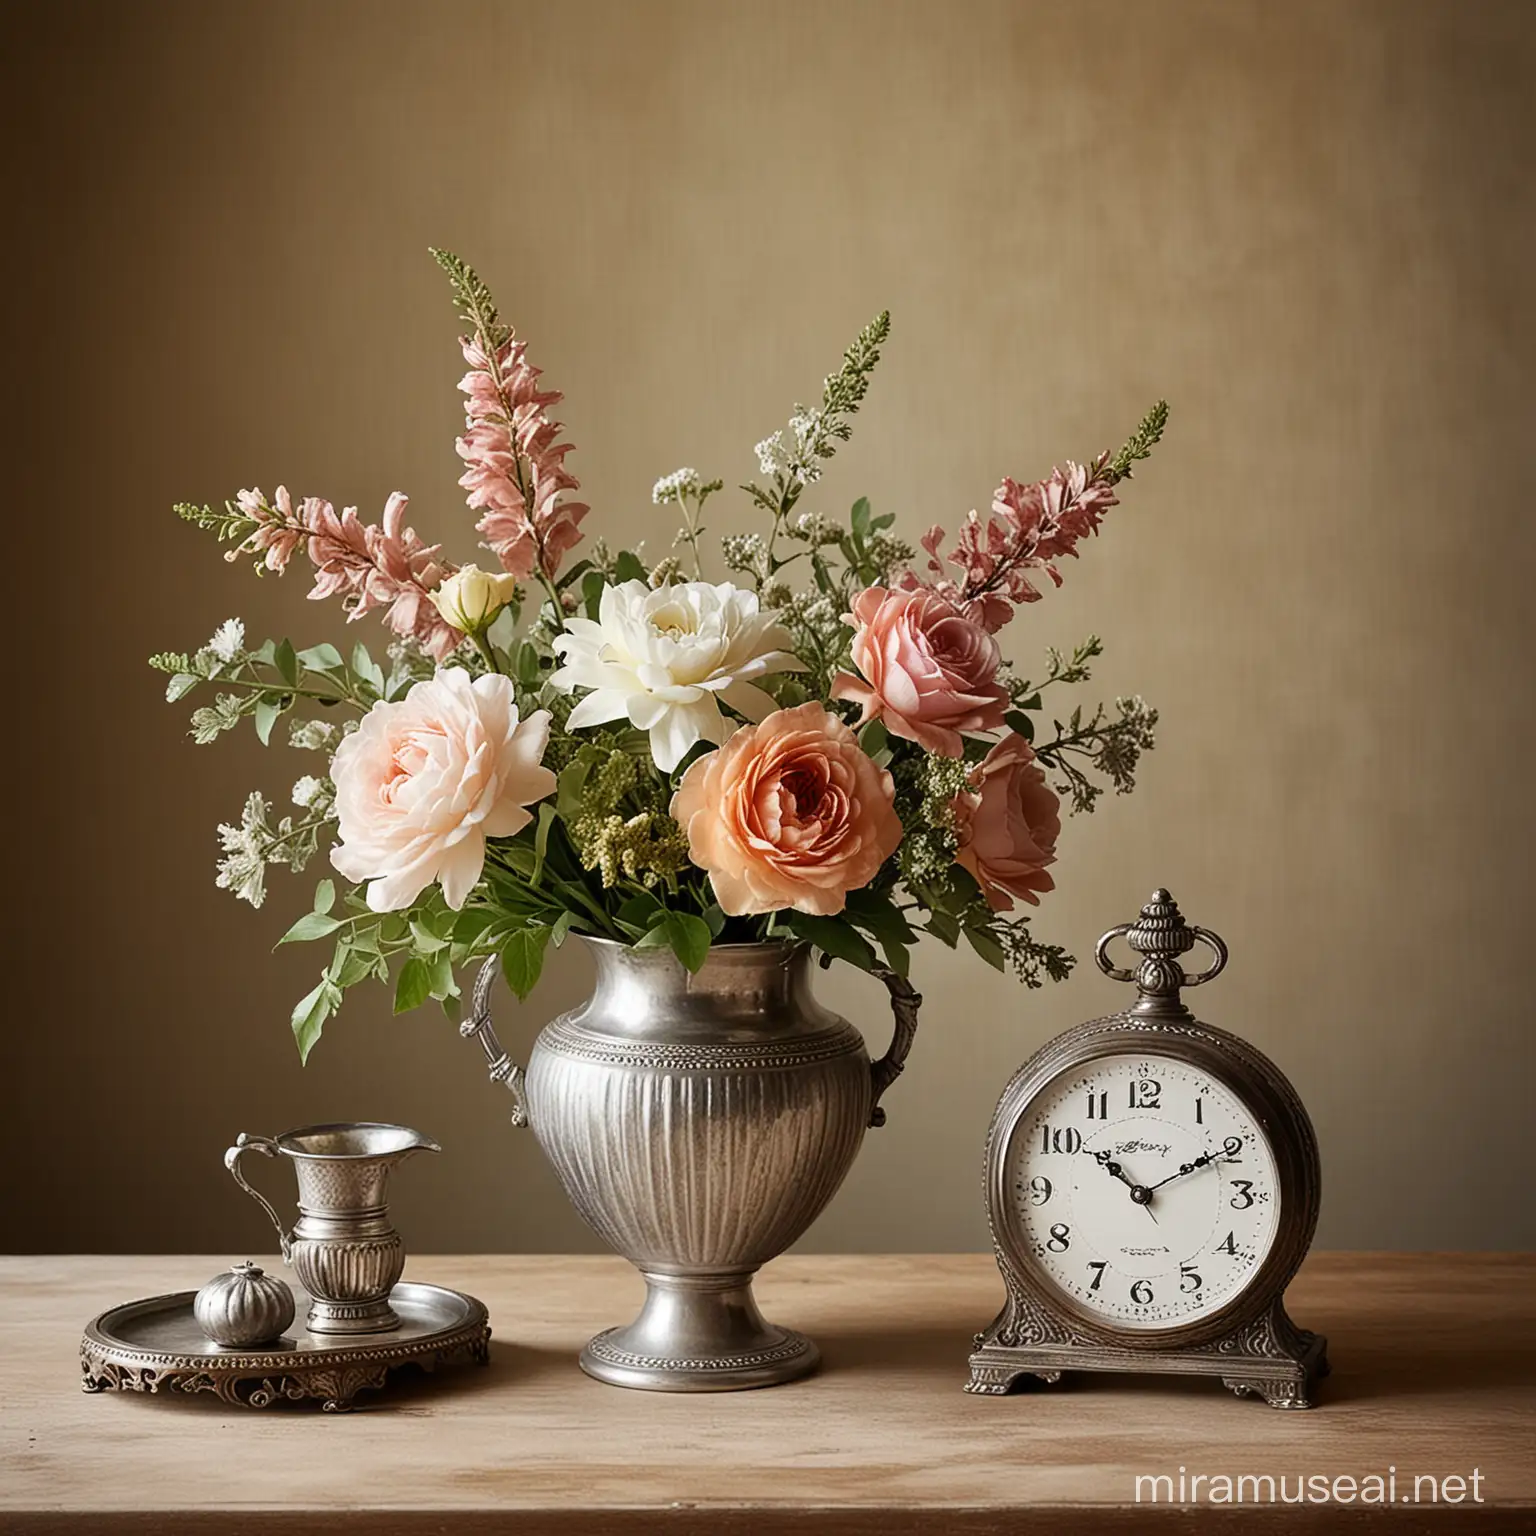 Compose a vintage-style still life with a silver vase as the centerpiece against antique backgrounds. Add classic elements like old-fashioned flowers or pocket watches for nostalgic charm. Use soft lighting to highlight textures and evoke a sense of history